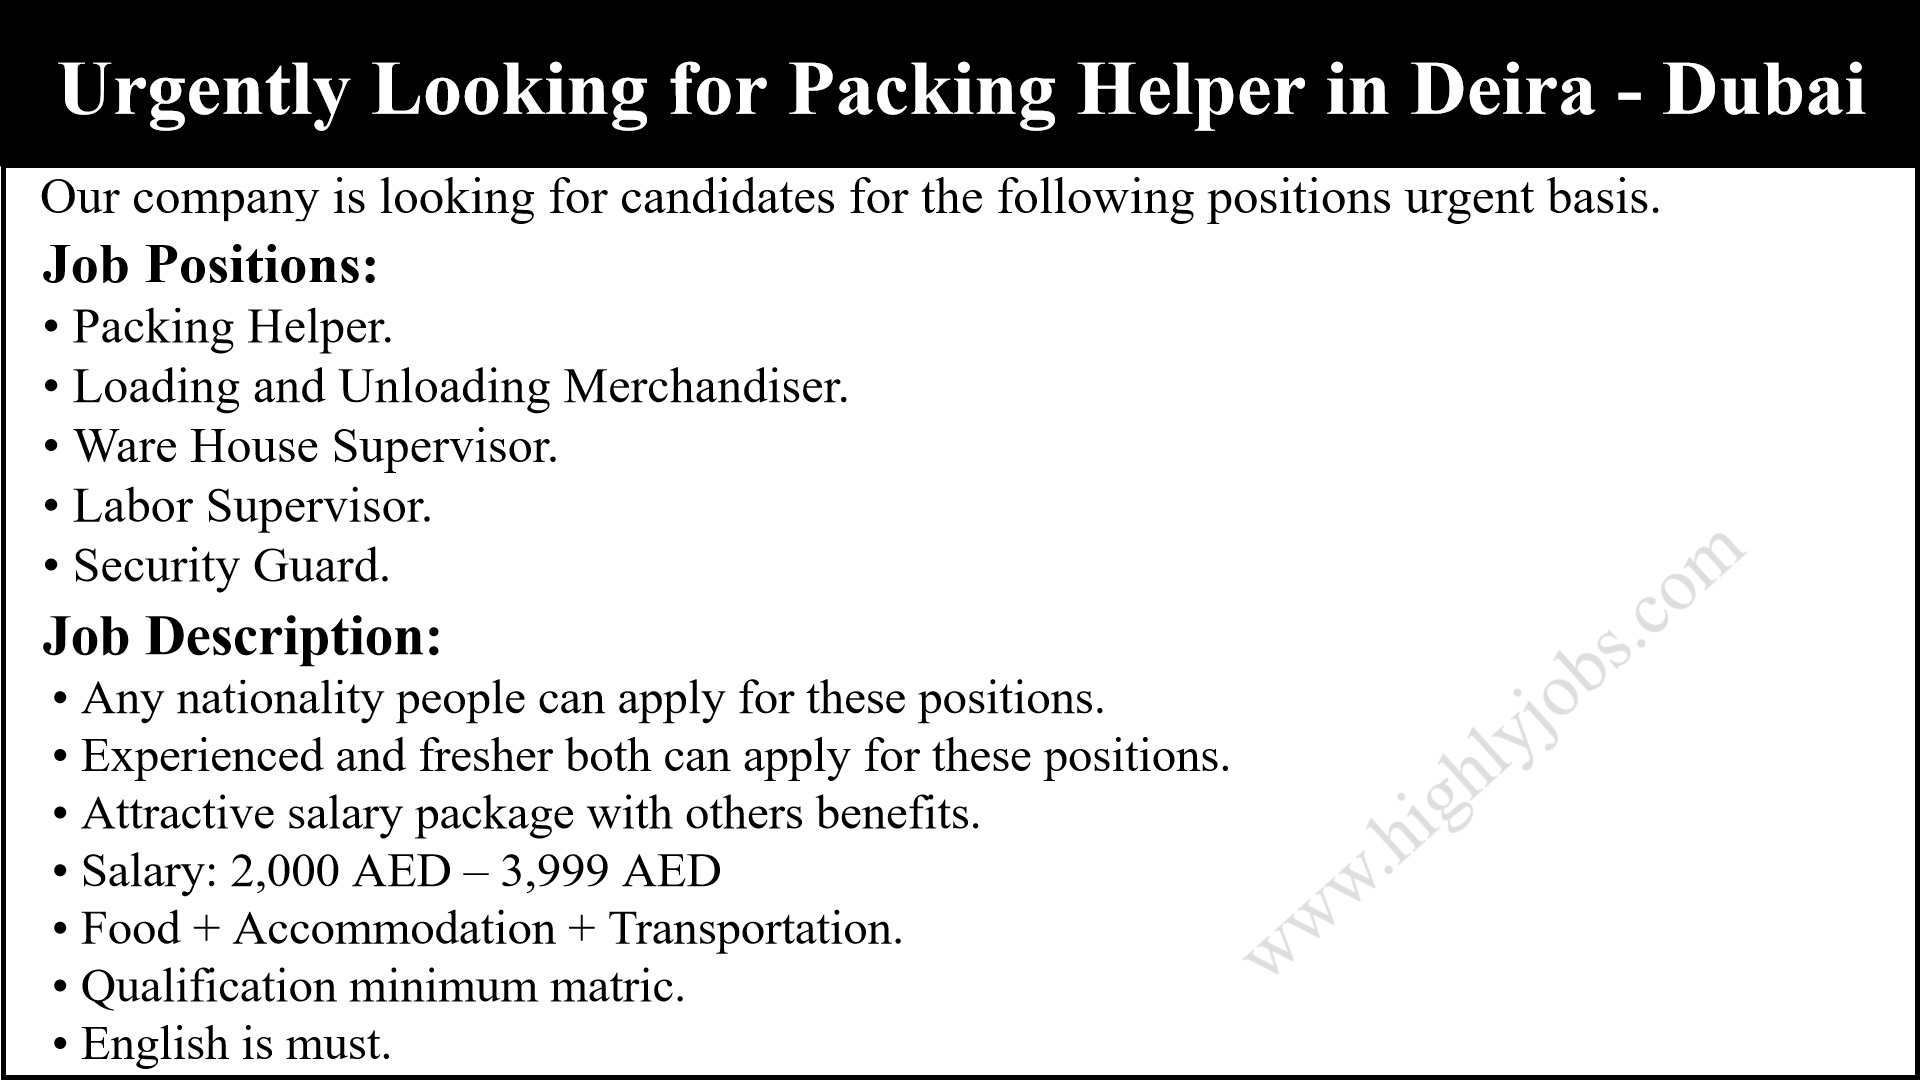 Urgently Looking for Packing Helper in Deira - Dubai